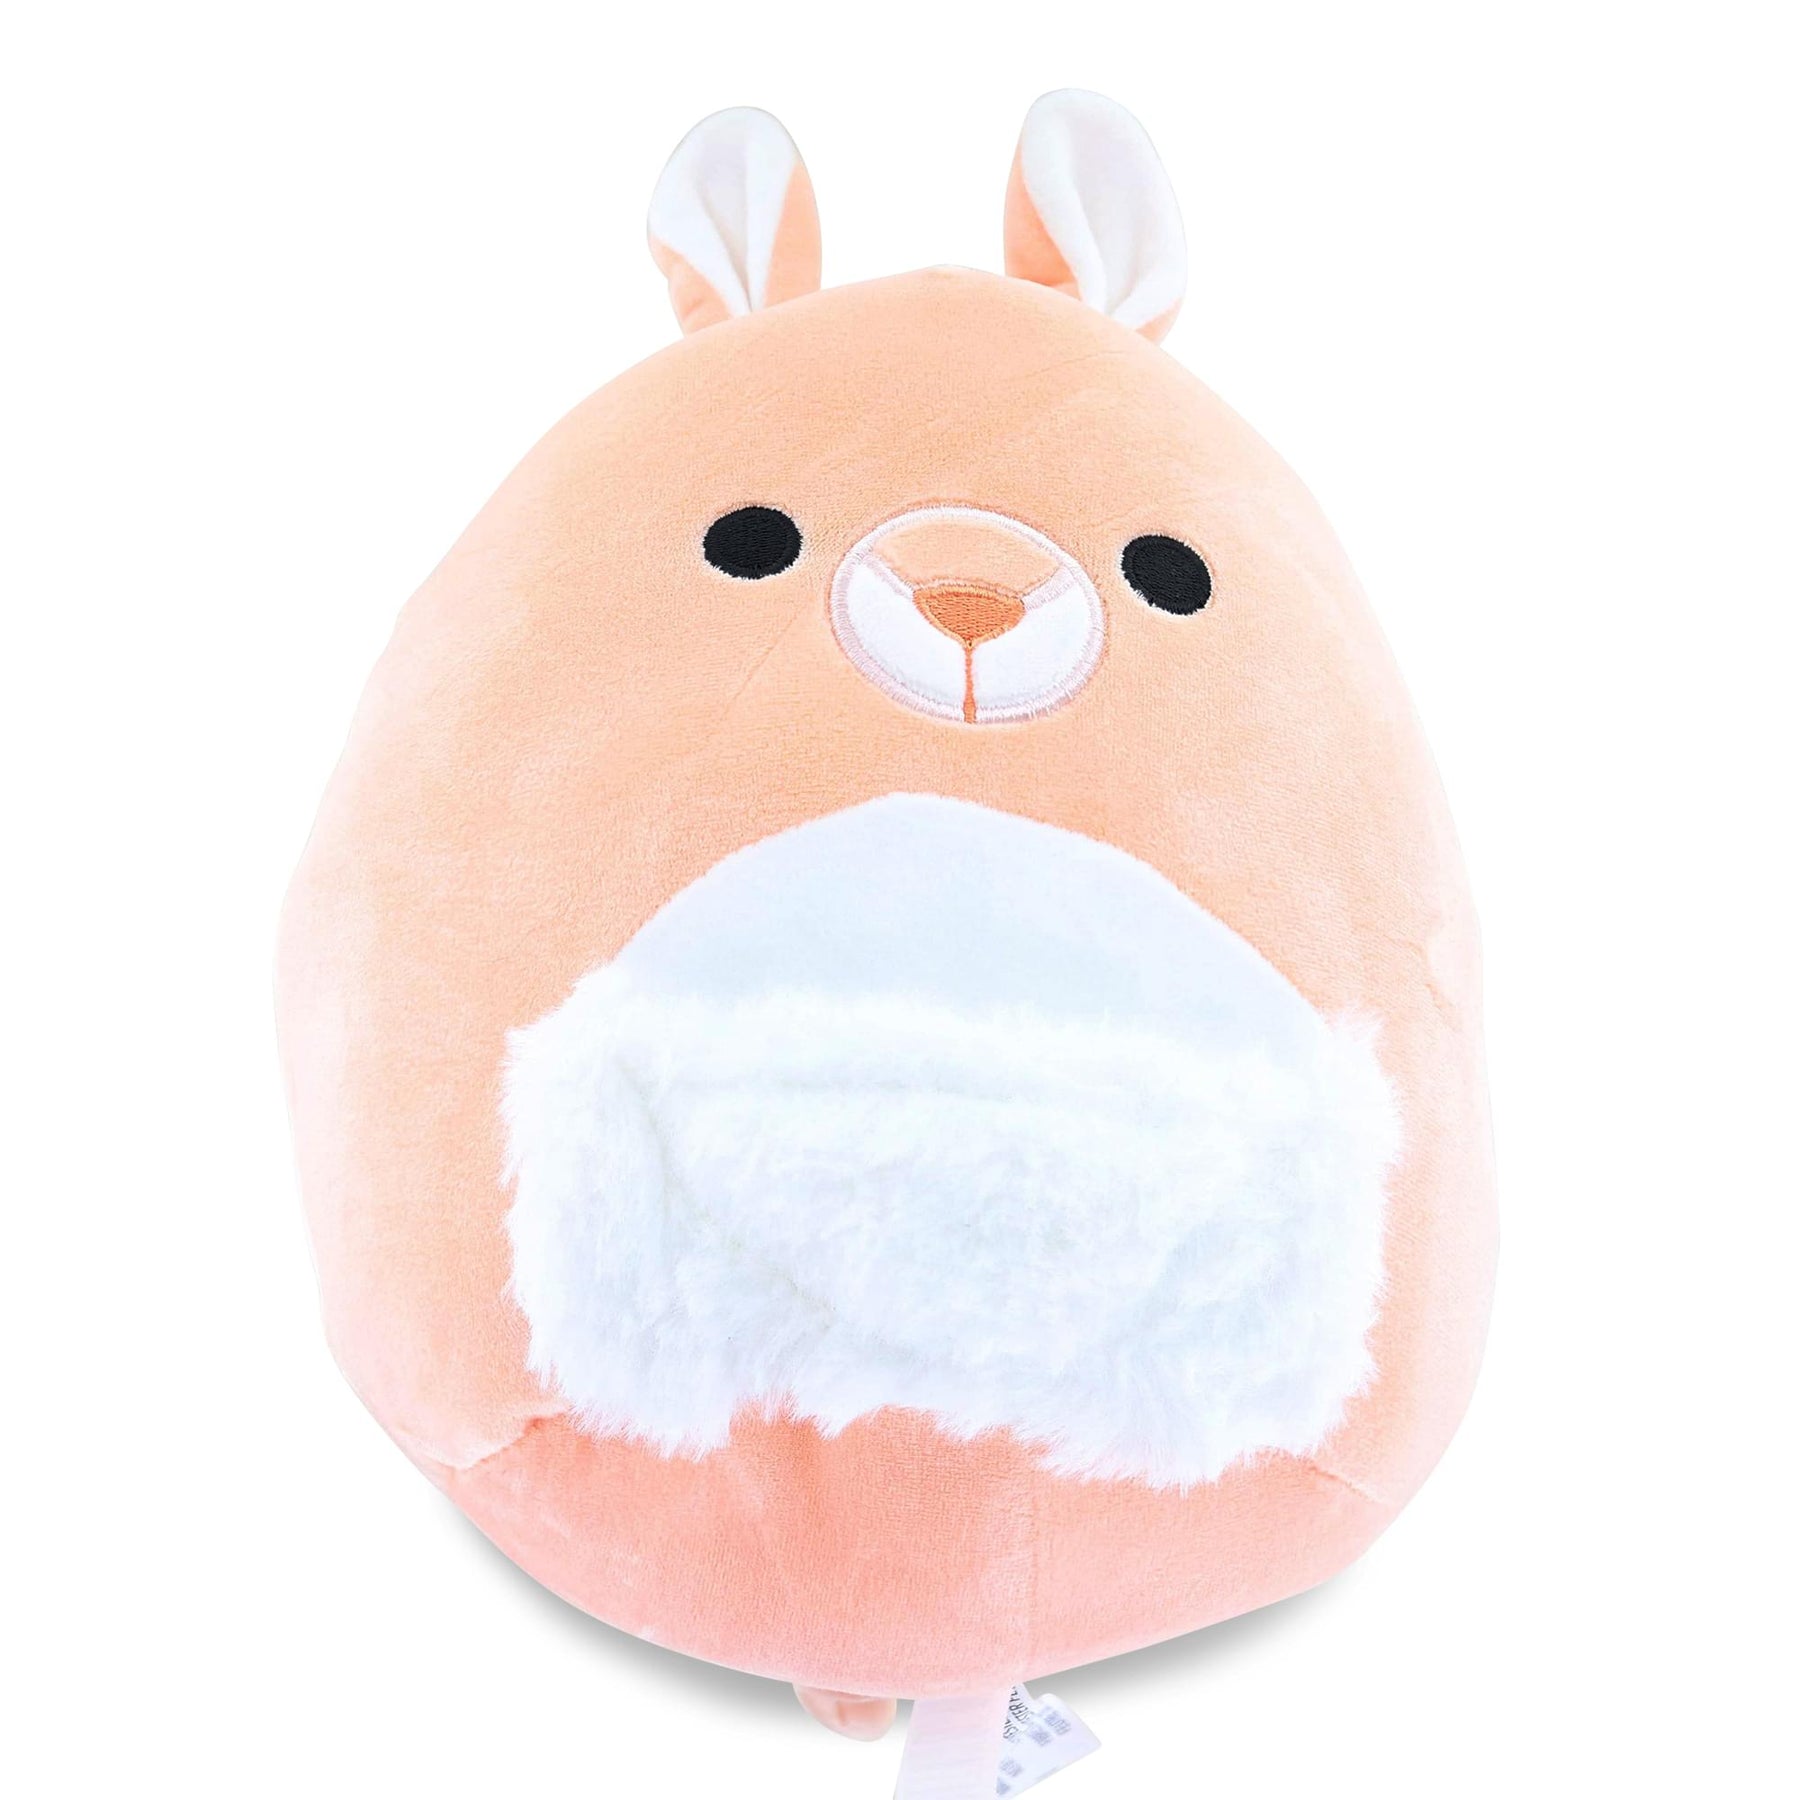 They going be an advent : r/squishmallow